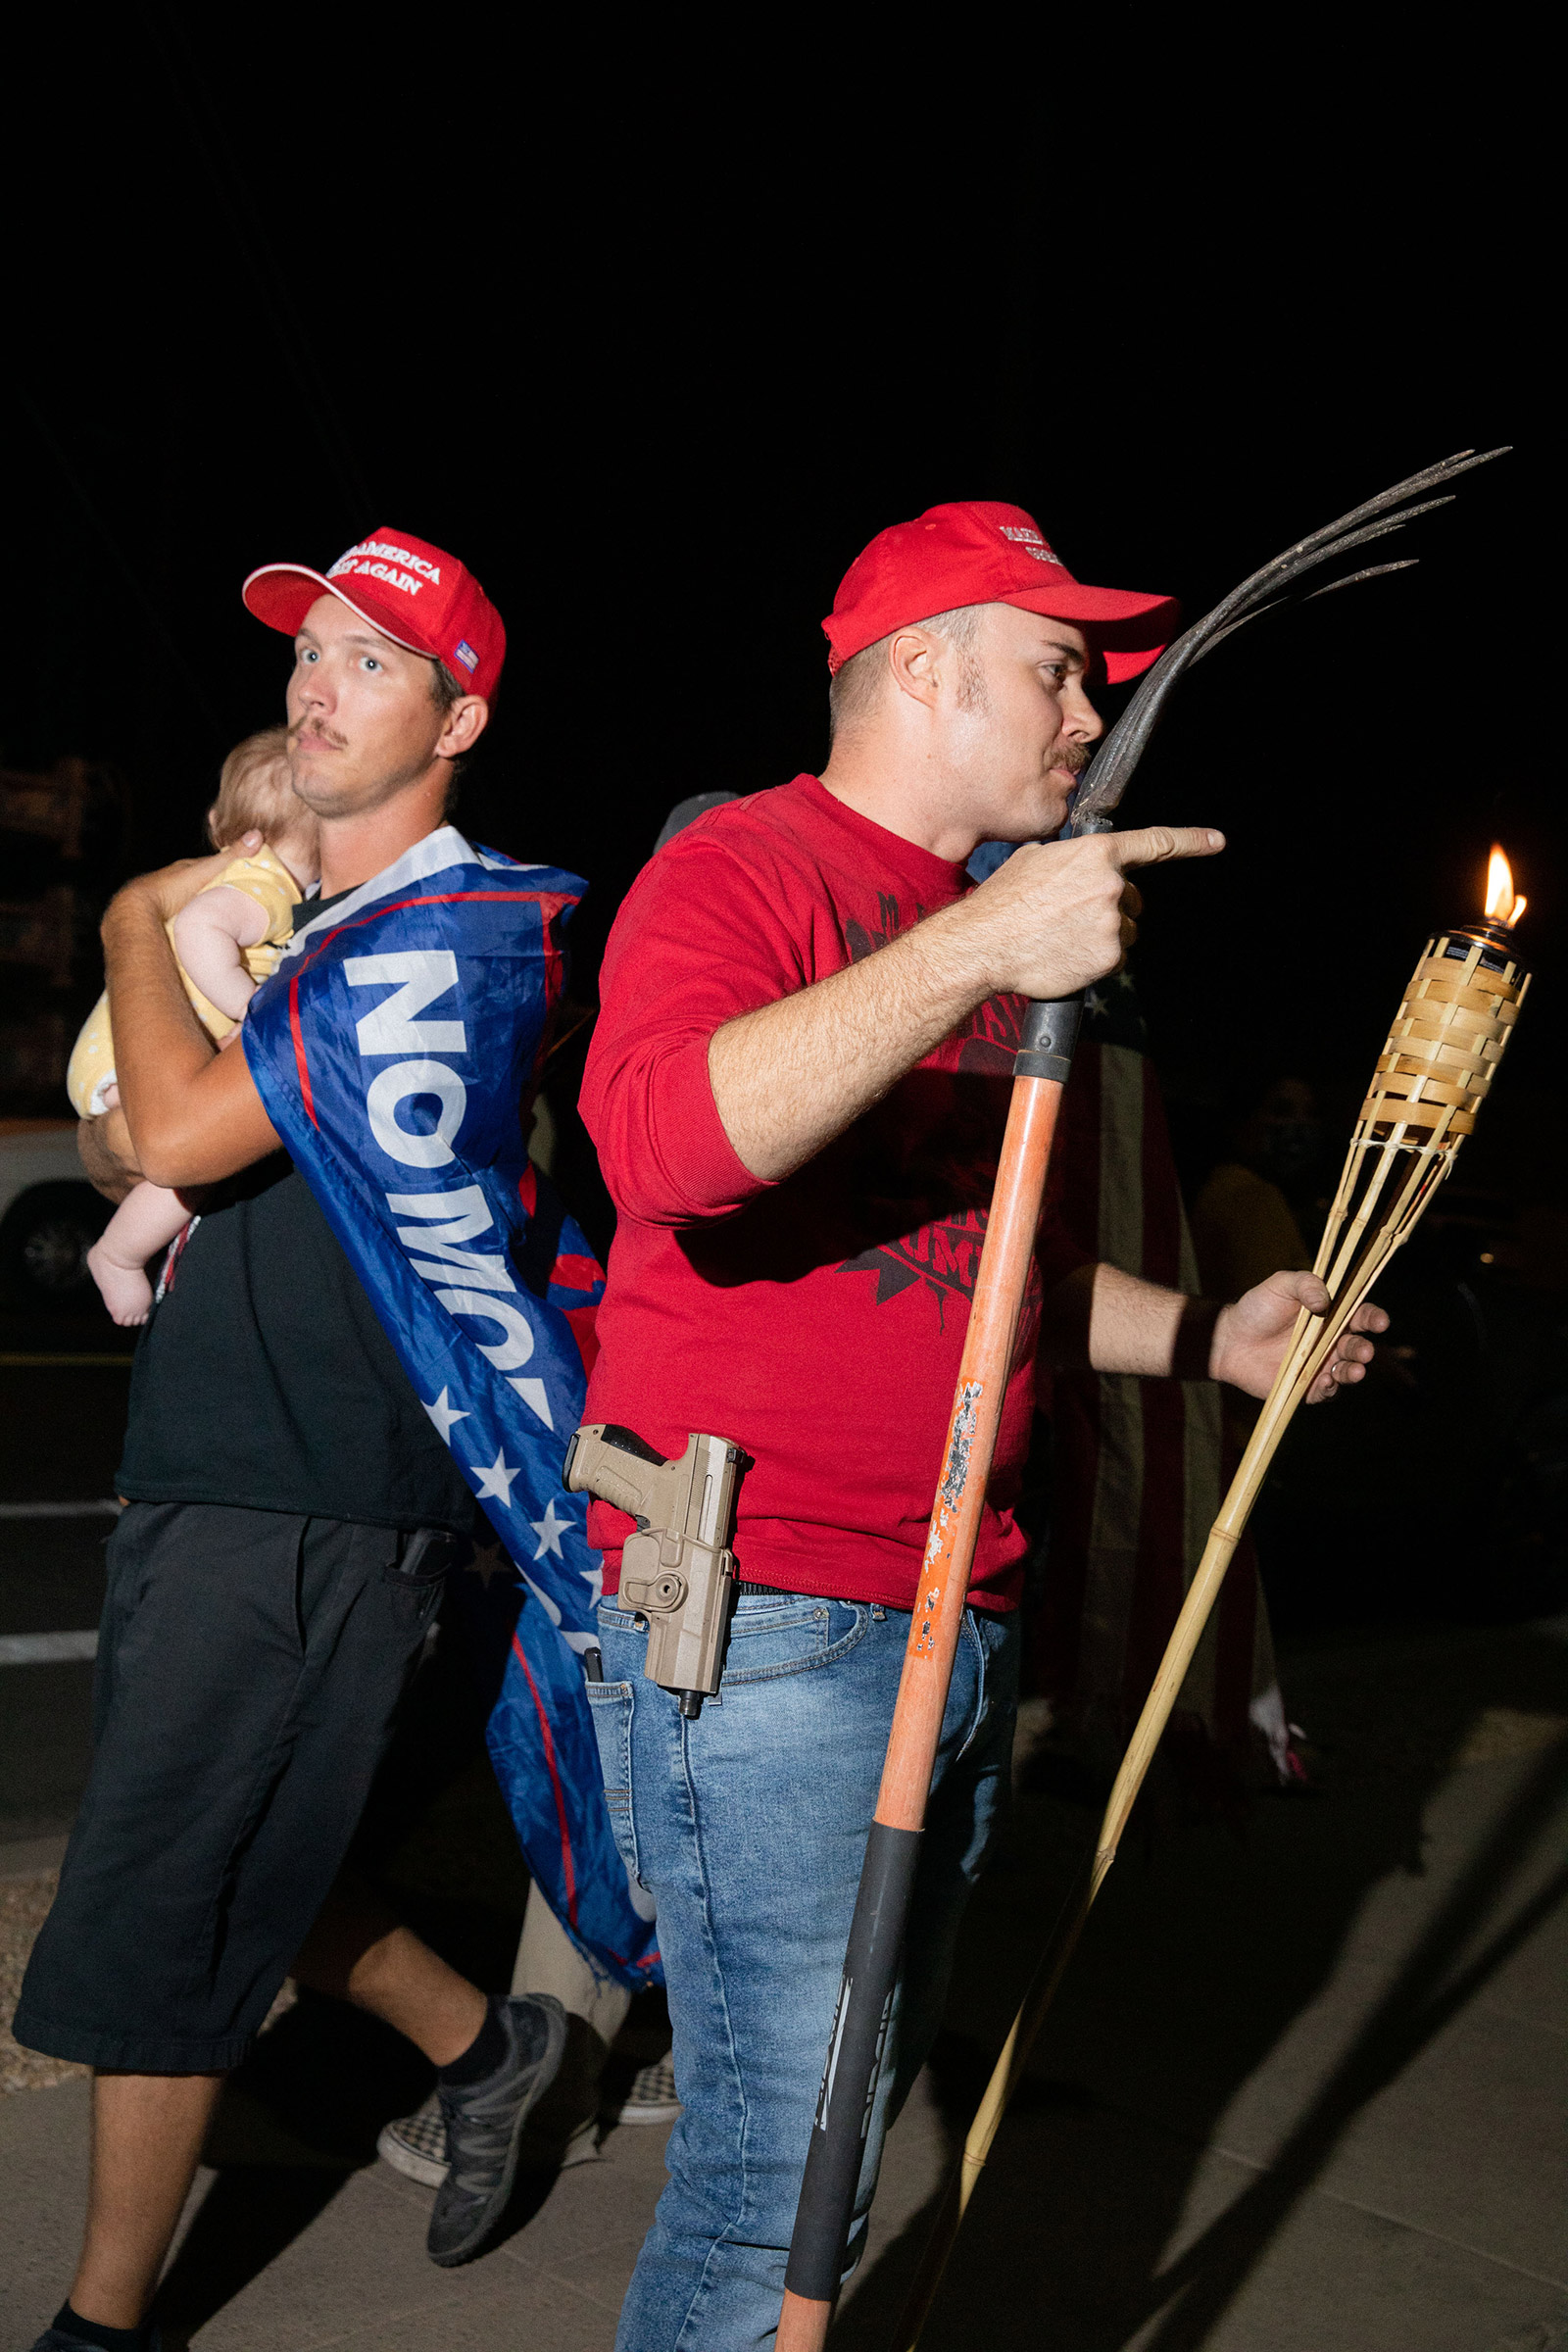 A father with child walks by a man with a rake, gun and tiki torch at the Maricopa County Elections office in Phoenix, on Nov. 5